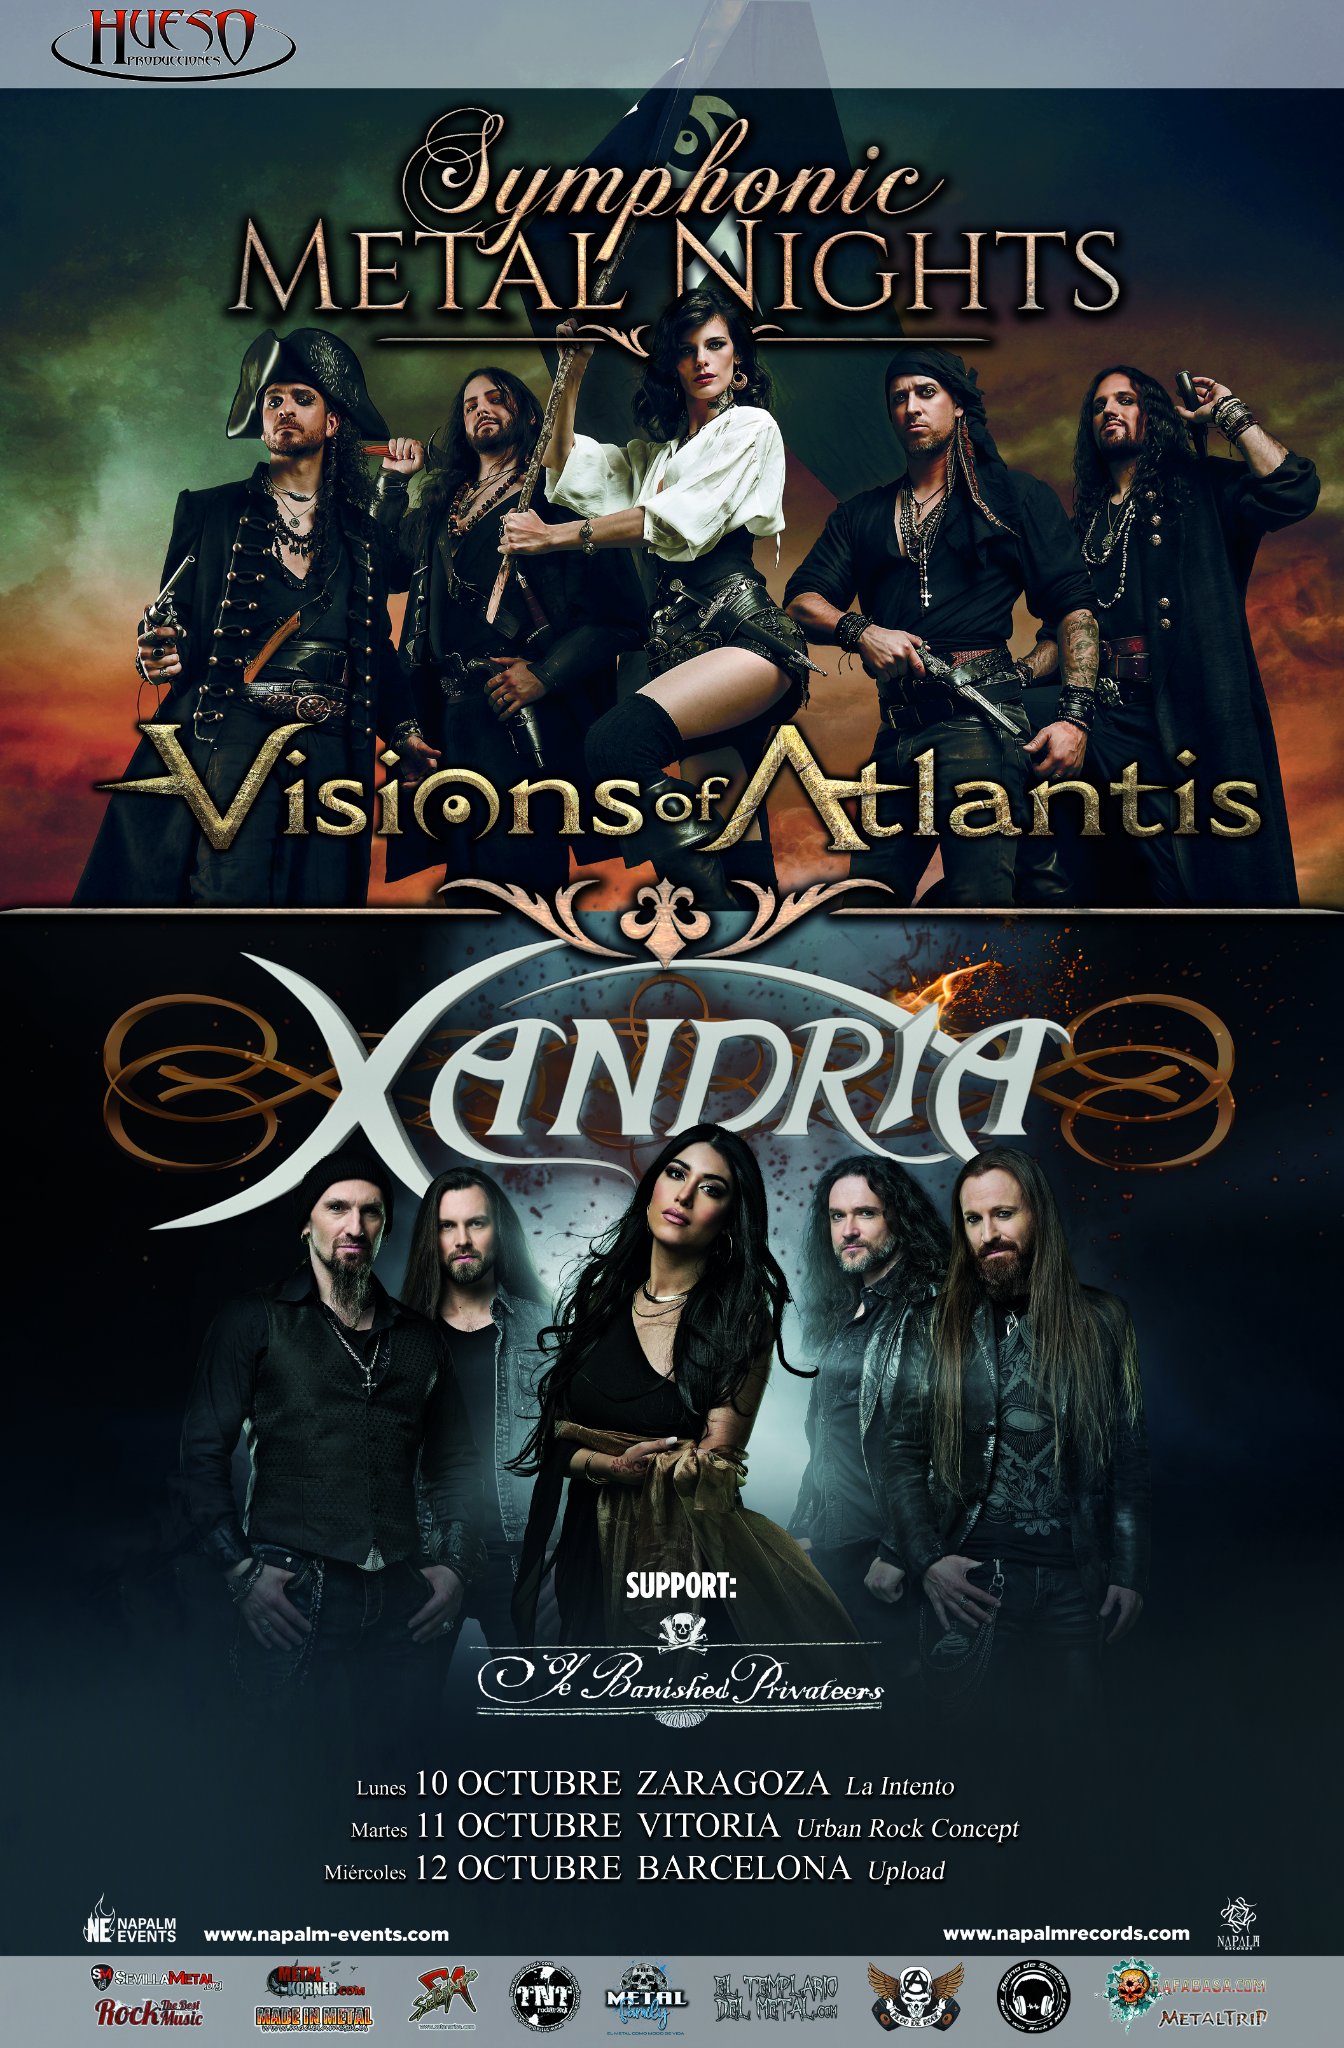 Symphonic Metal Nights con Visions Of Atlantis, Xandria y Ye Banished Privateers